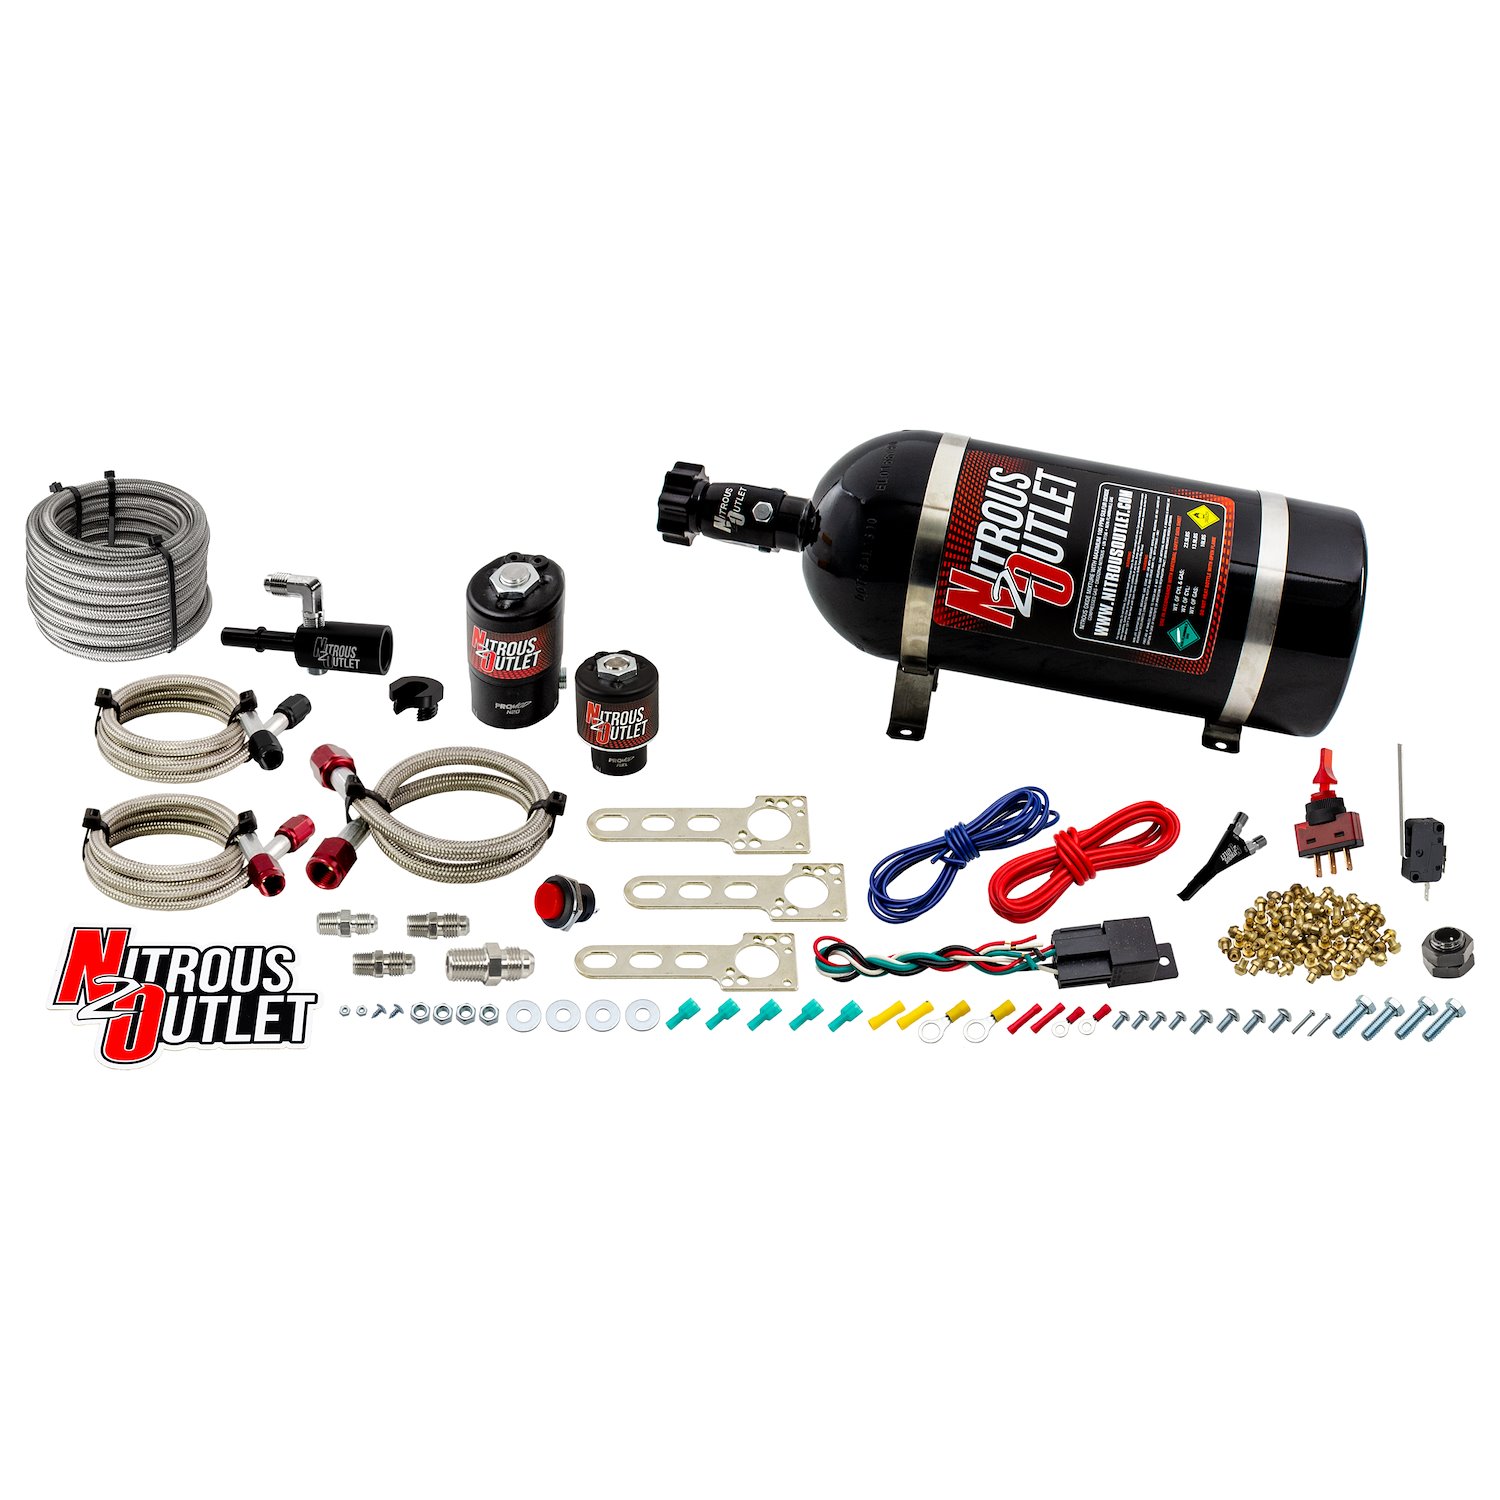 00-10016-10 EFI Single-Nozzle System, 2011-2015 Ford Mustang 5.0/F-150, Gas/E85, 5-55psi, 35-200HP, 10lb Bottle